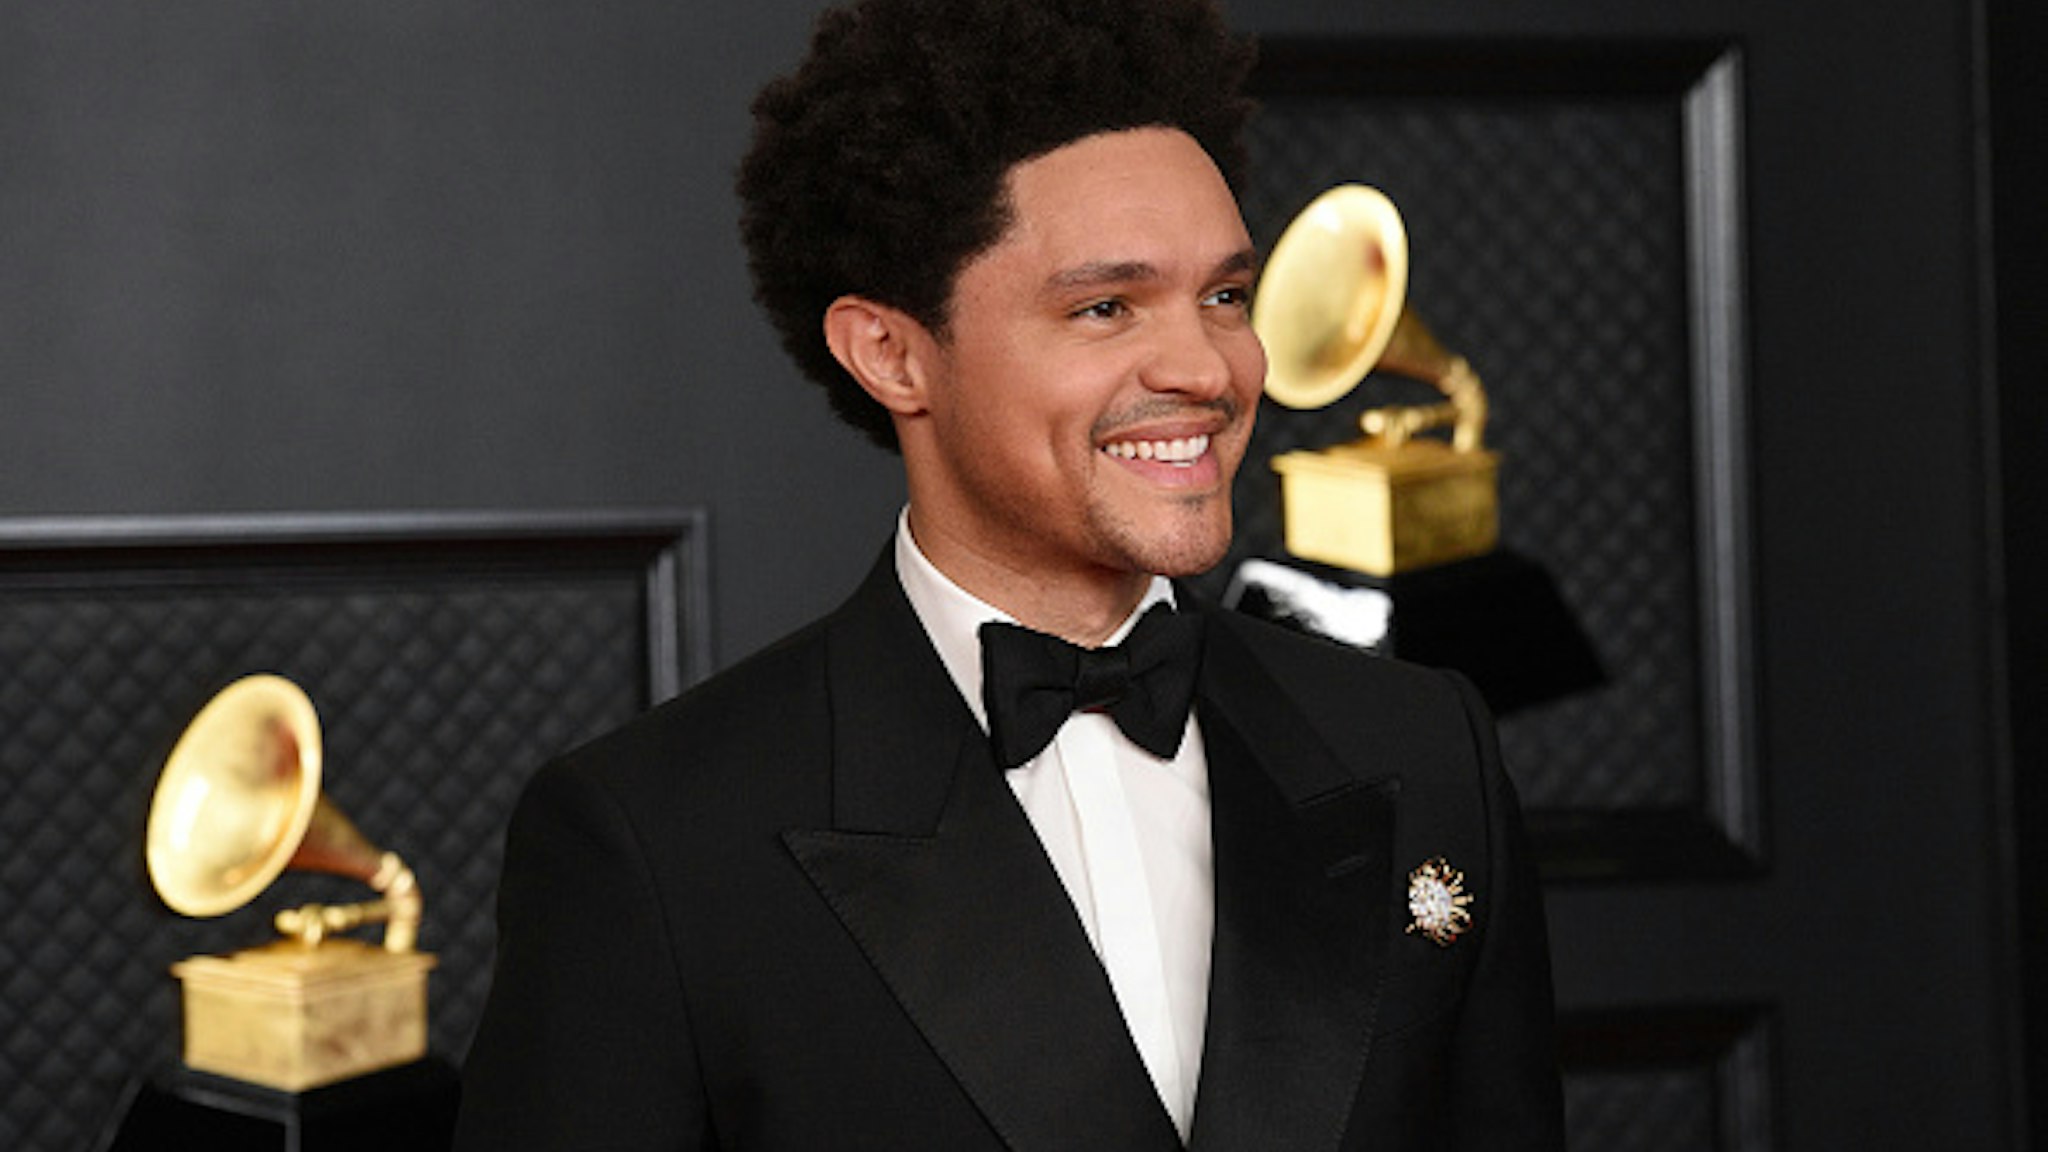 LOS ANGELES, CALIFORNIA - MARCH 14: Trevor Noah attends the 63rd Annual GRAMMY Awards at Los Angeles Convention Center on March 14, 2021 in Los Angeles, California.